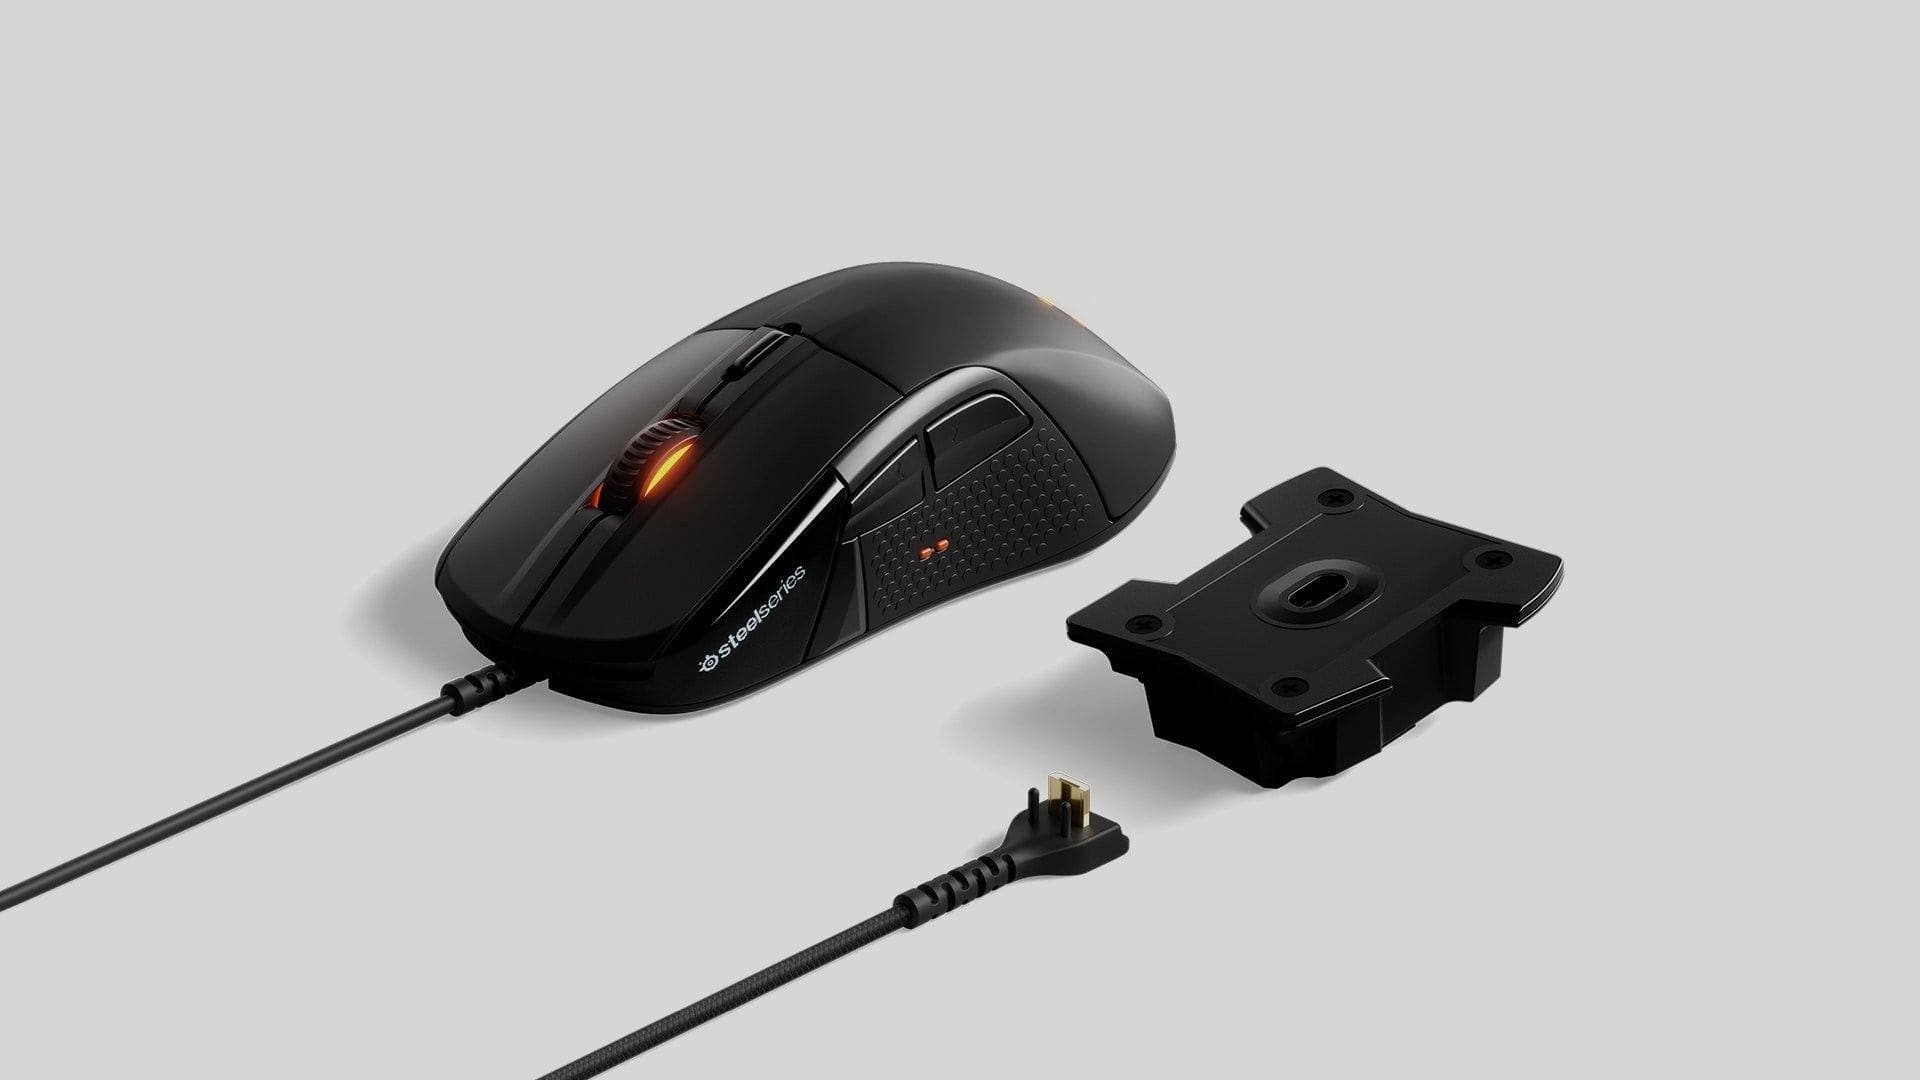 Steelseries - Rival 710 Gaming Mouse Steelseries